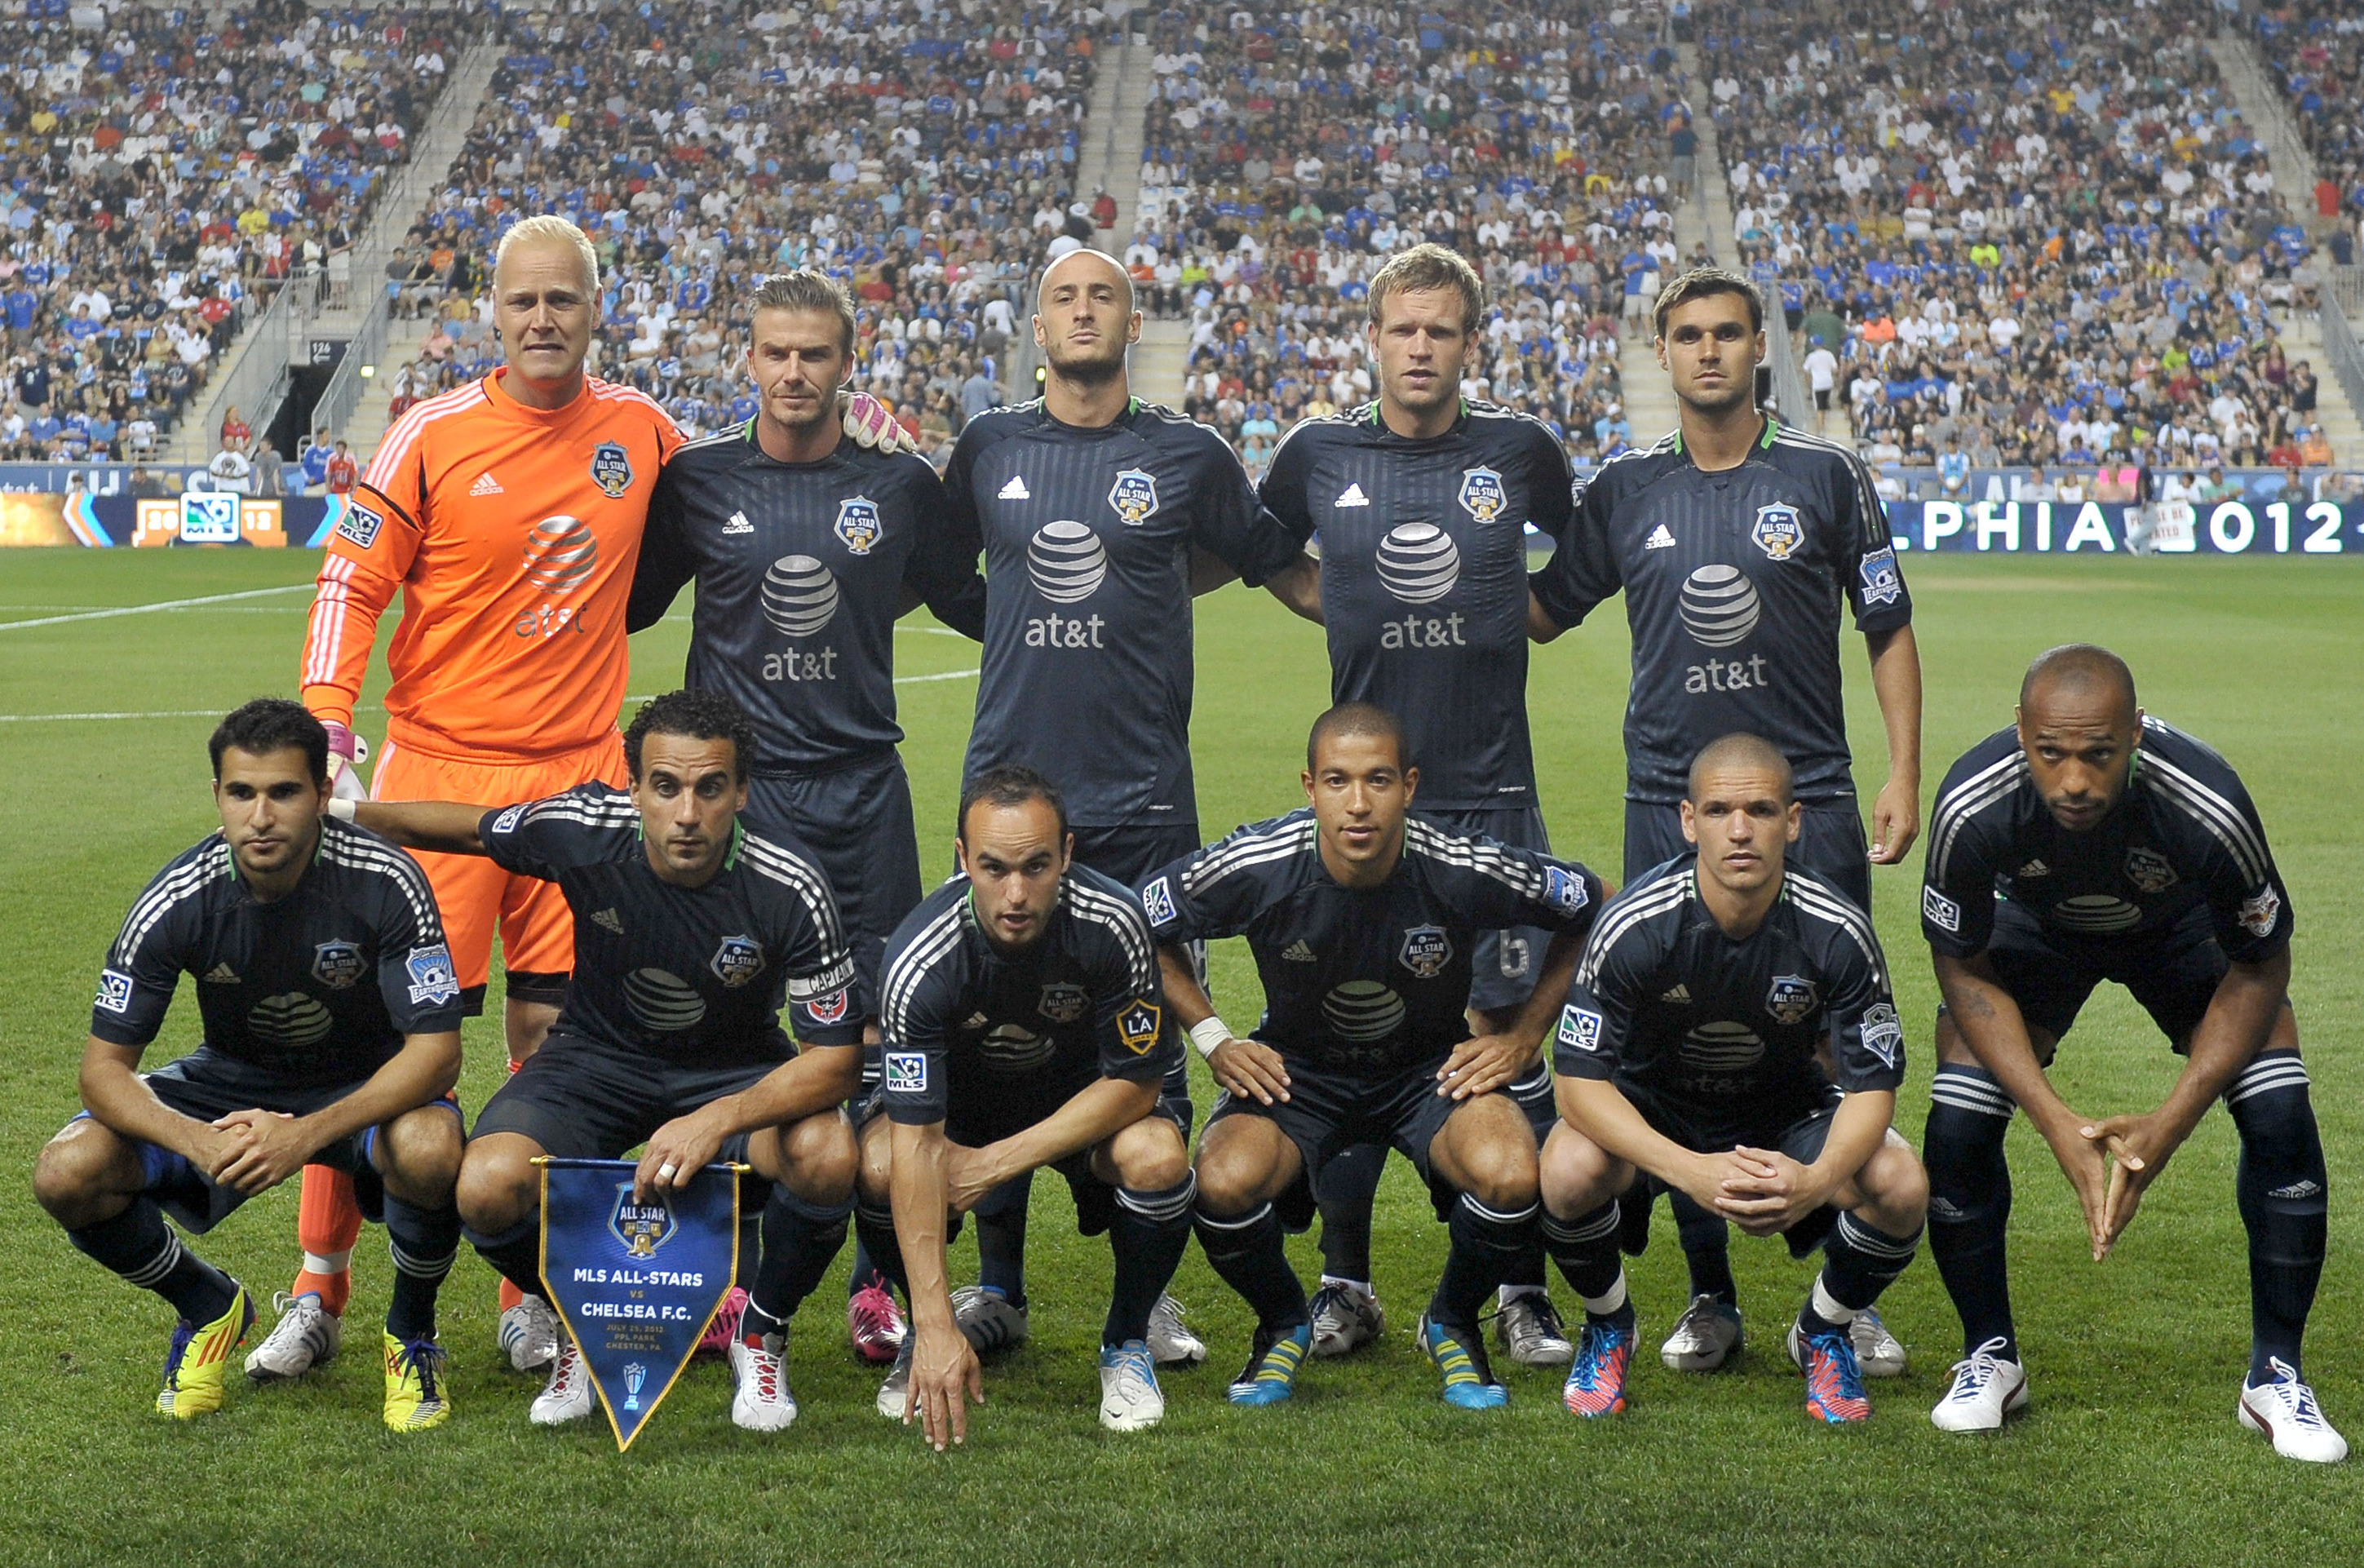 Get a first look at the new 2013 AT&T MLS All-Star Game jersey on